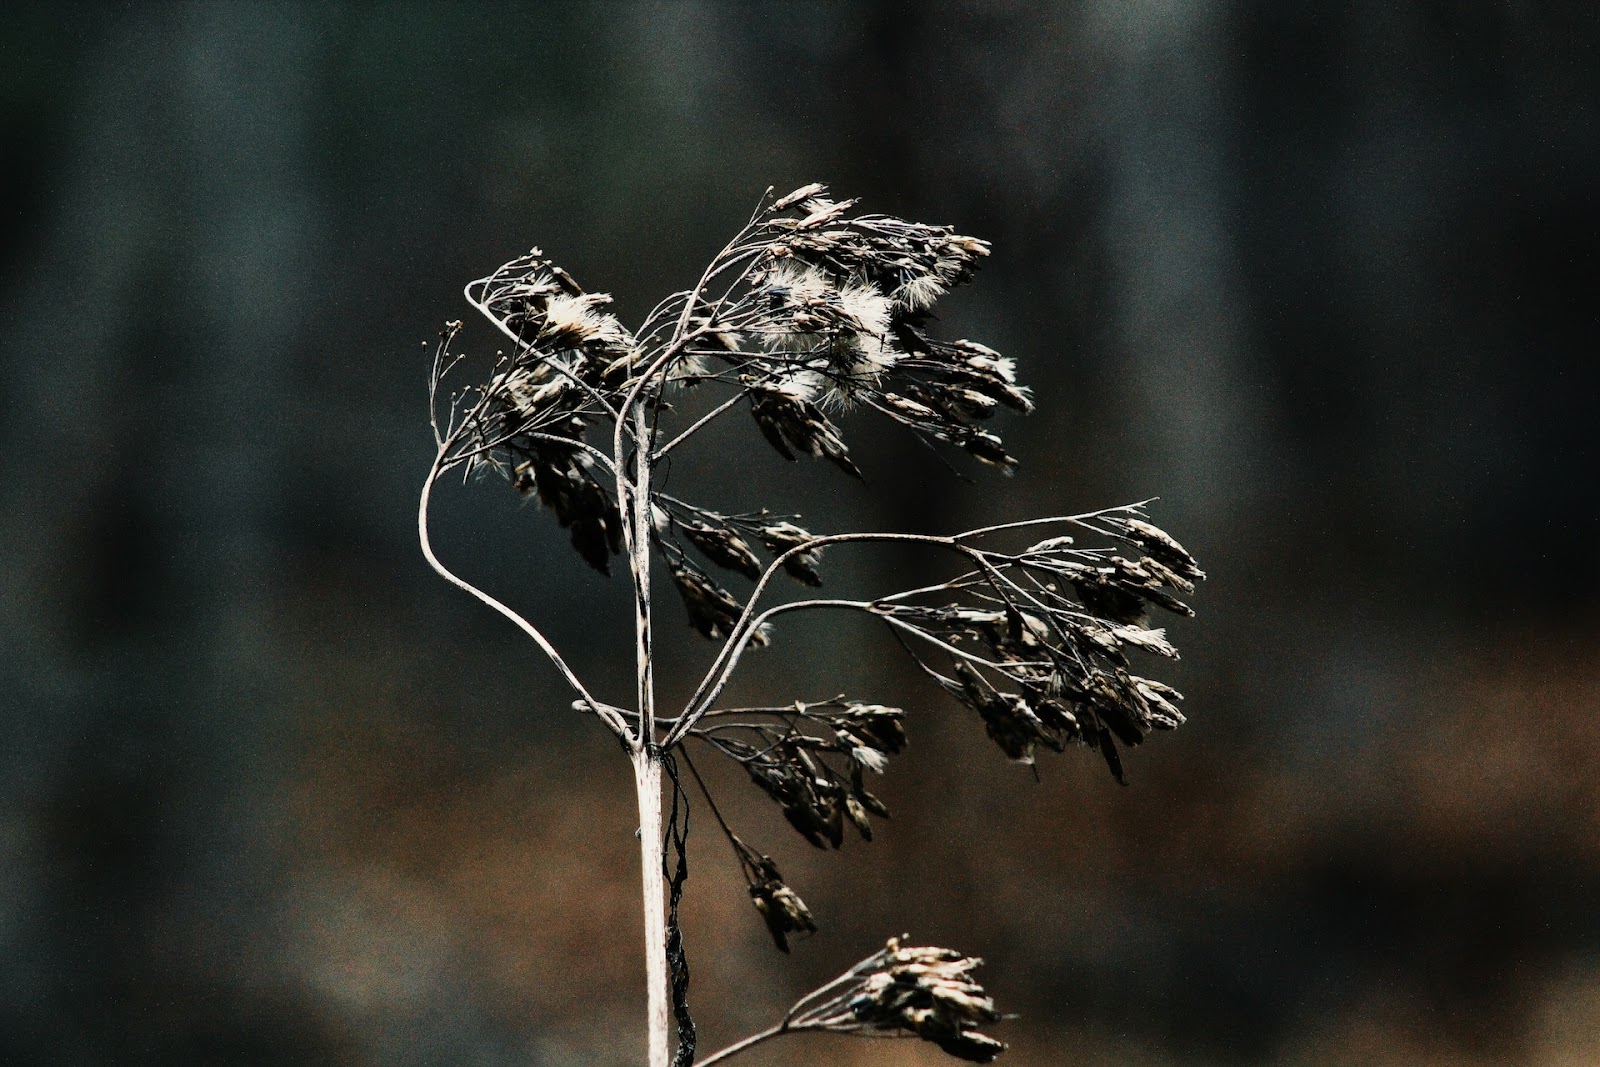 A burned plant completely wiped after a forest fire